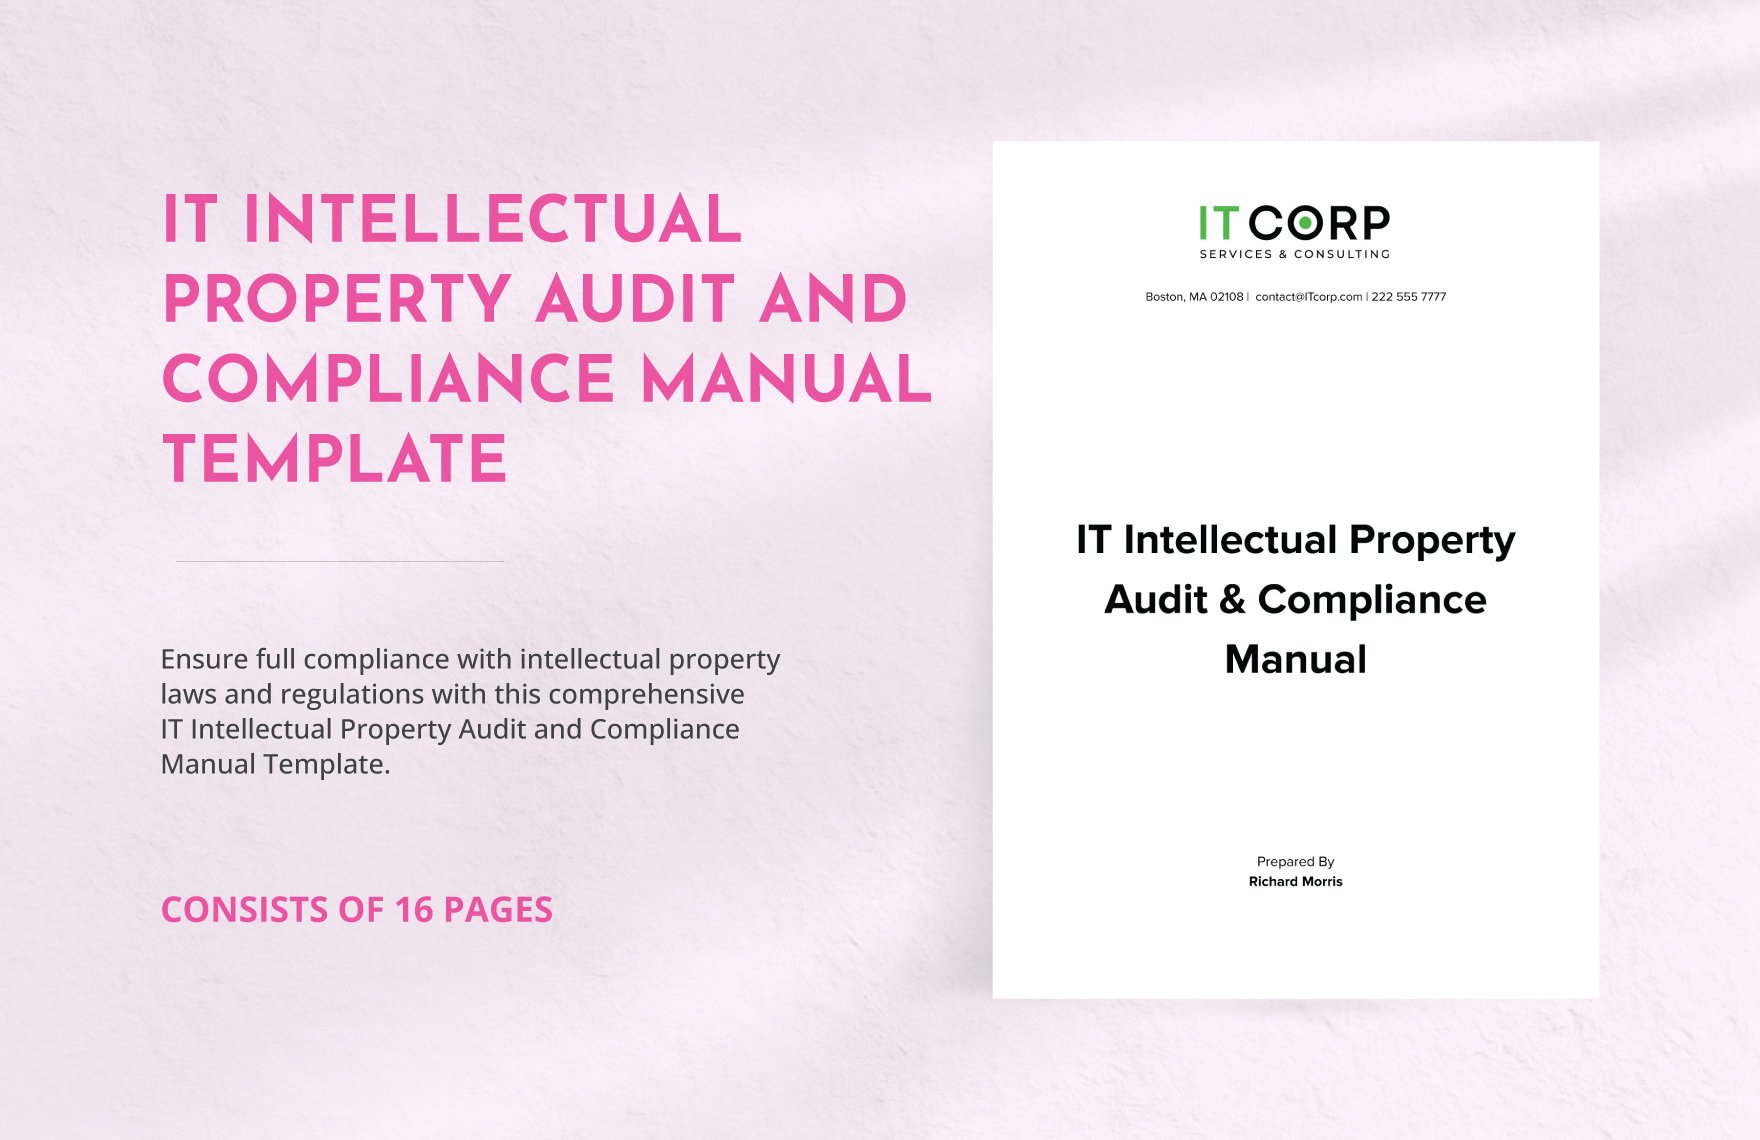 IT Intellectual Property Audit and Compliance Manual Template in Word, Google Docs, PDF